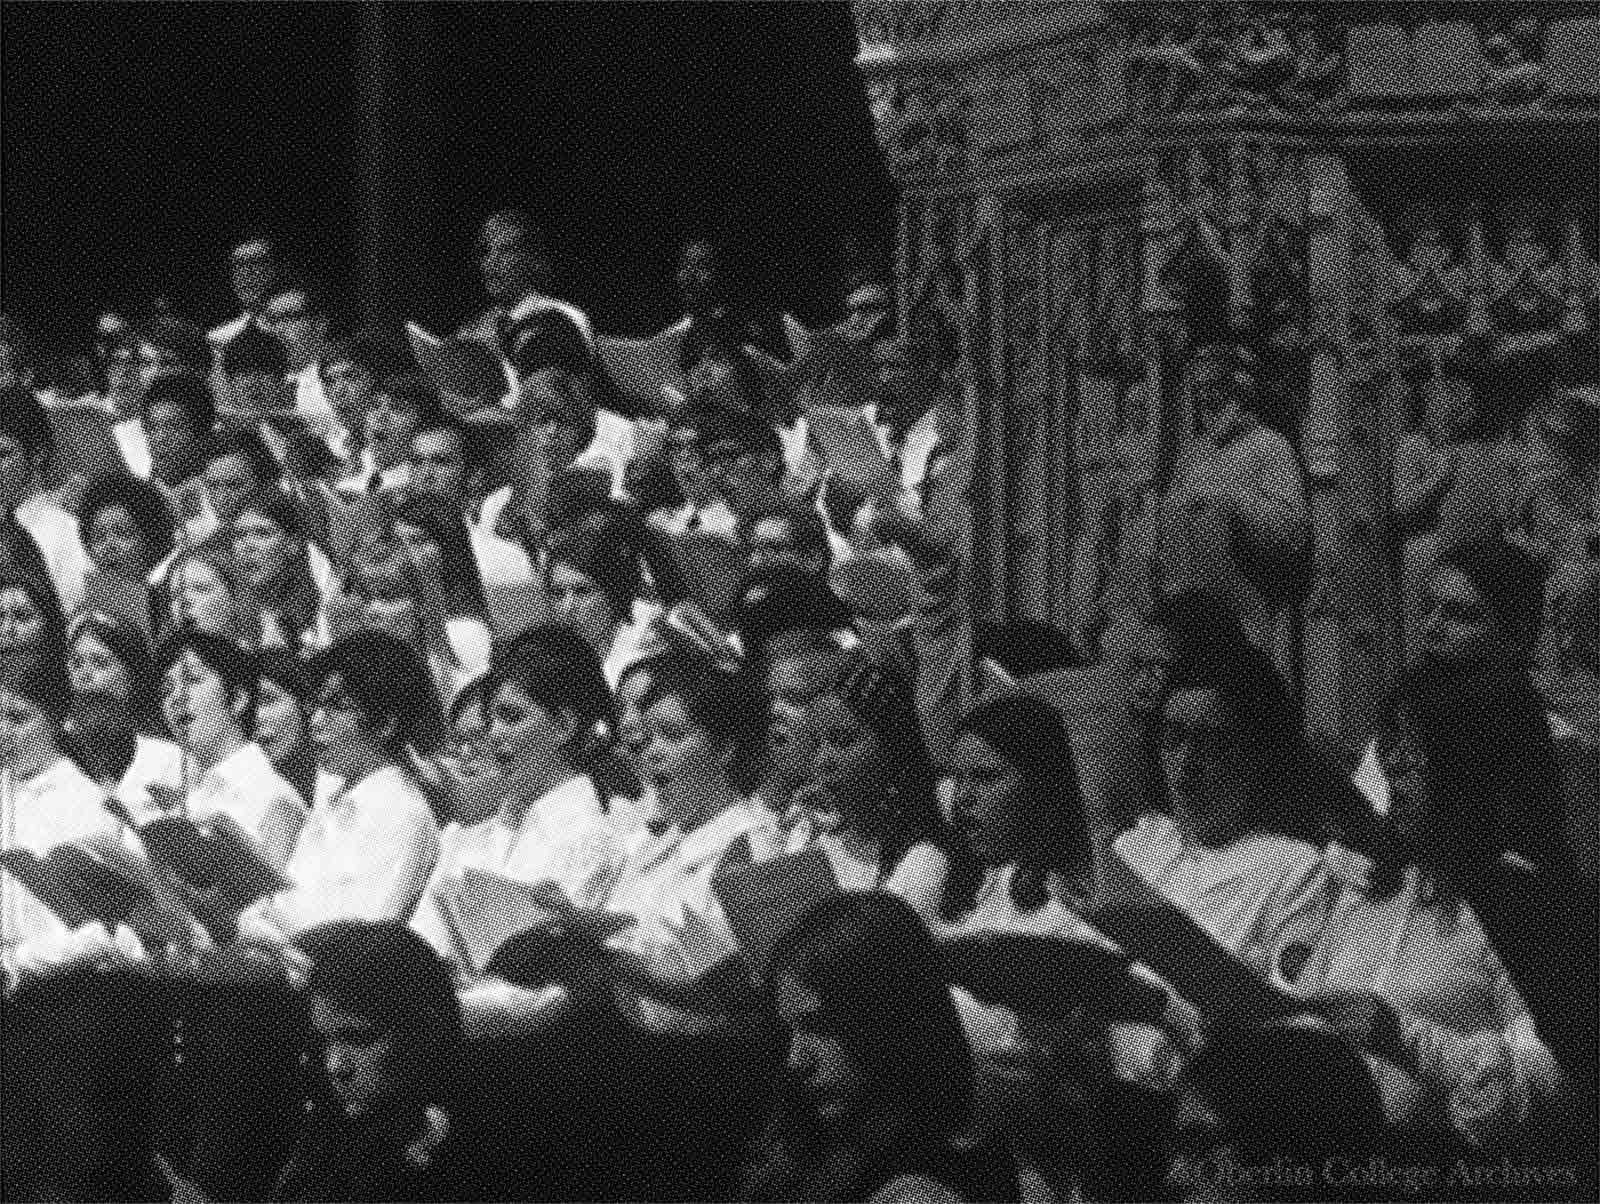 A choir of young women and men perform in the cathedral. In the background are statues of religious figures.